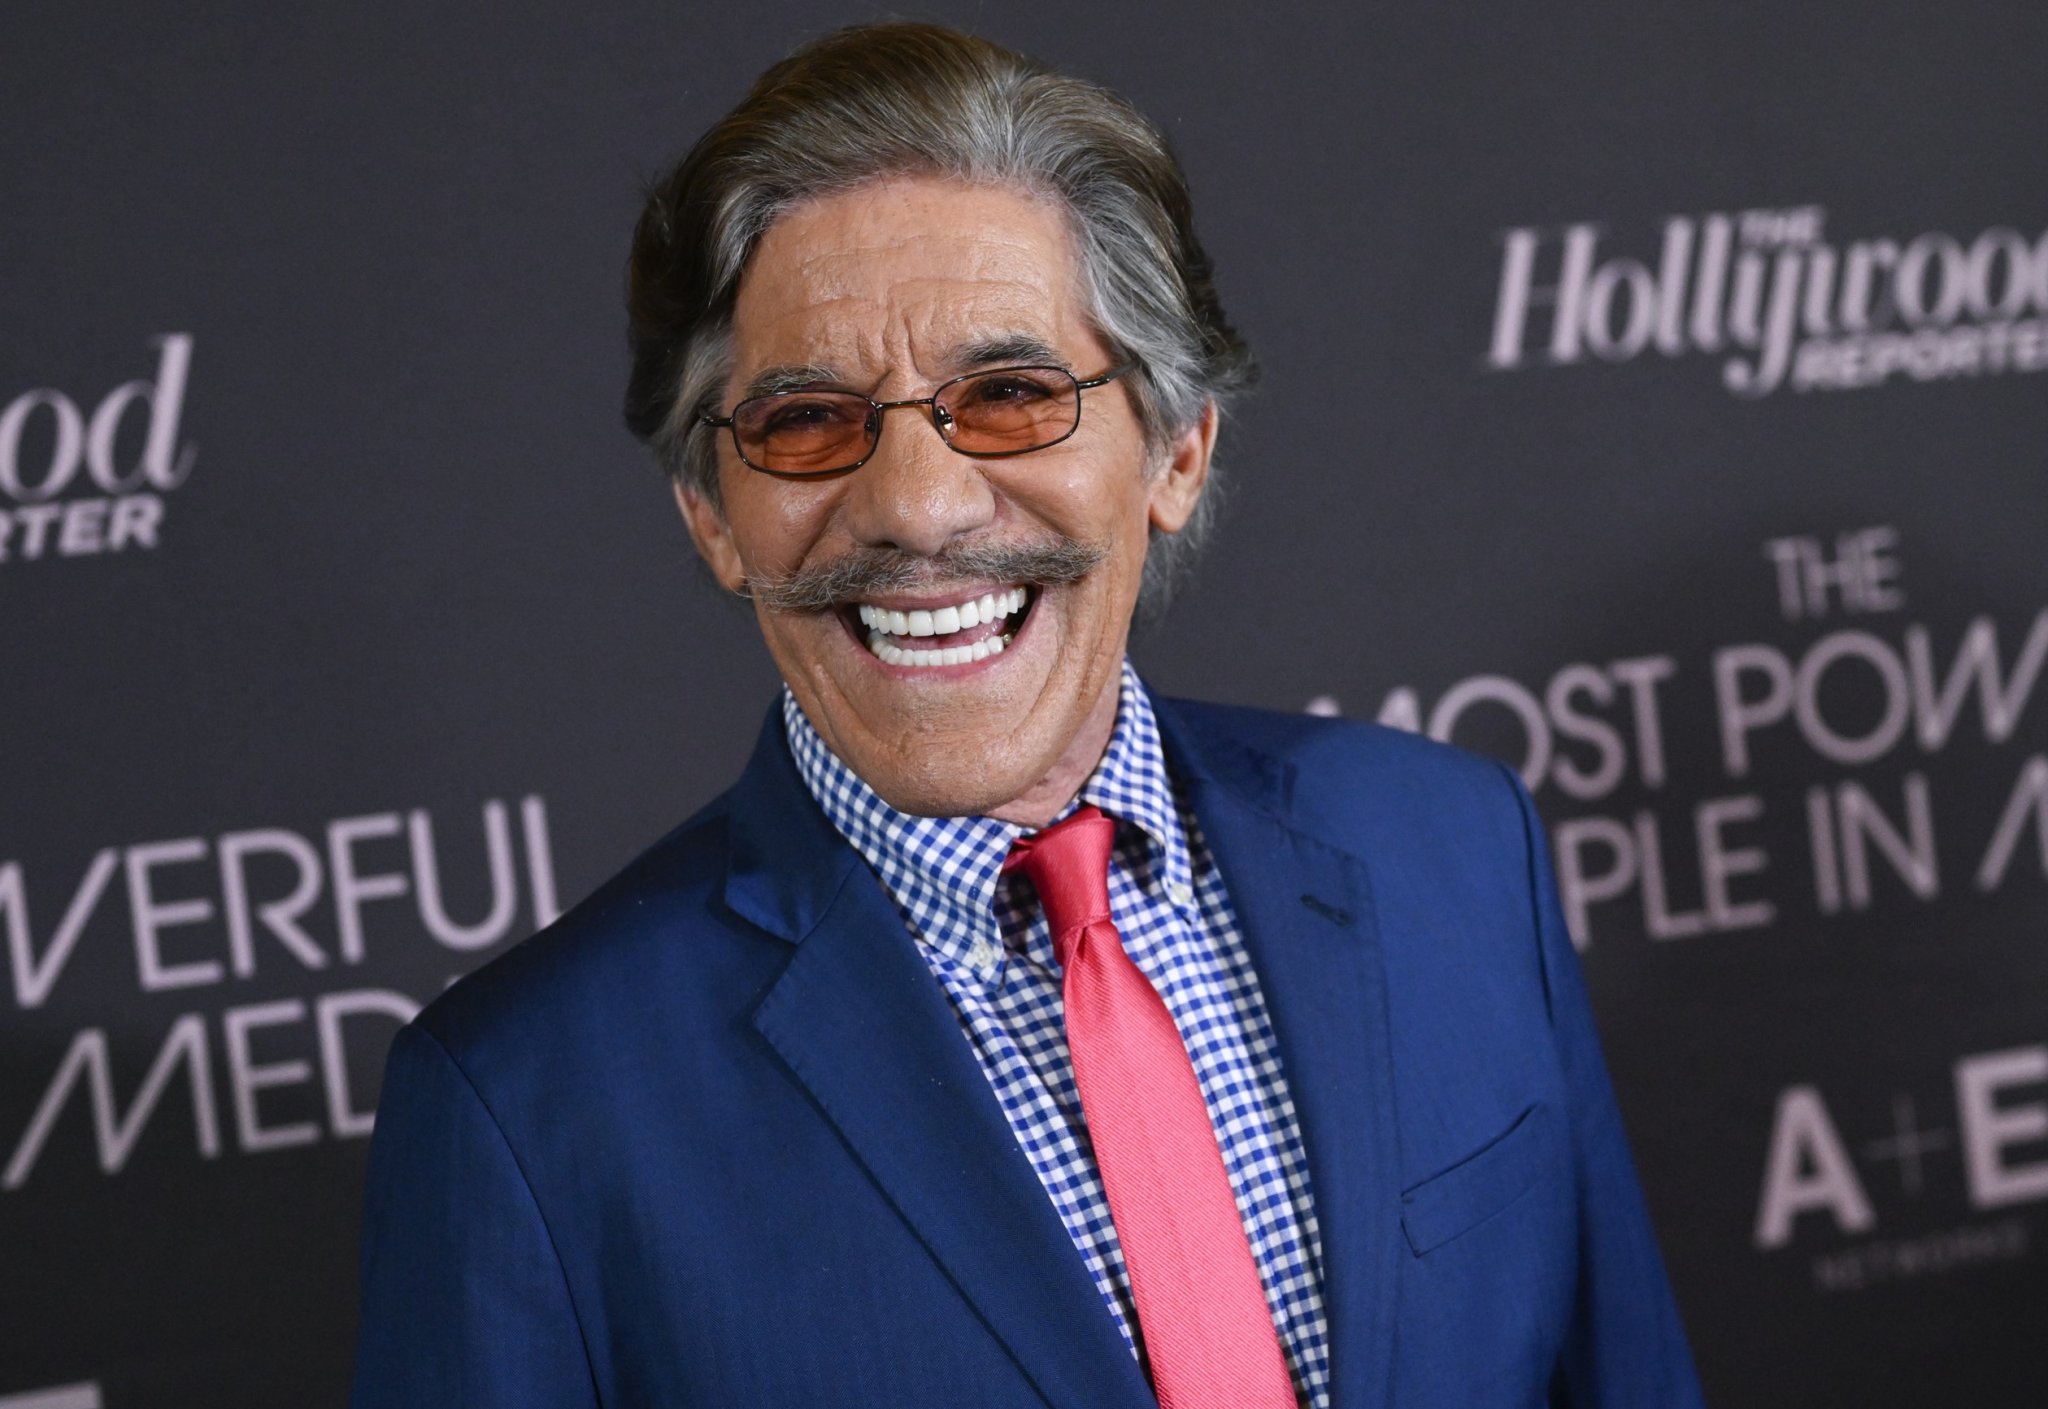 Geraldo Rivera ridiculed for suggesting this man ‘could be the strongest GOP alternative for POTUS’